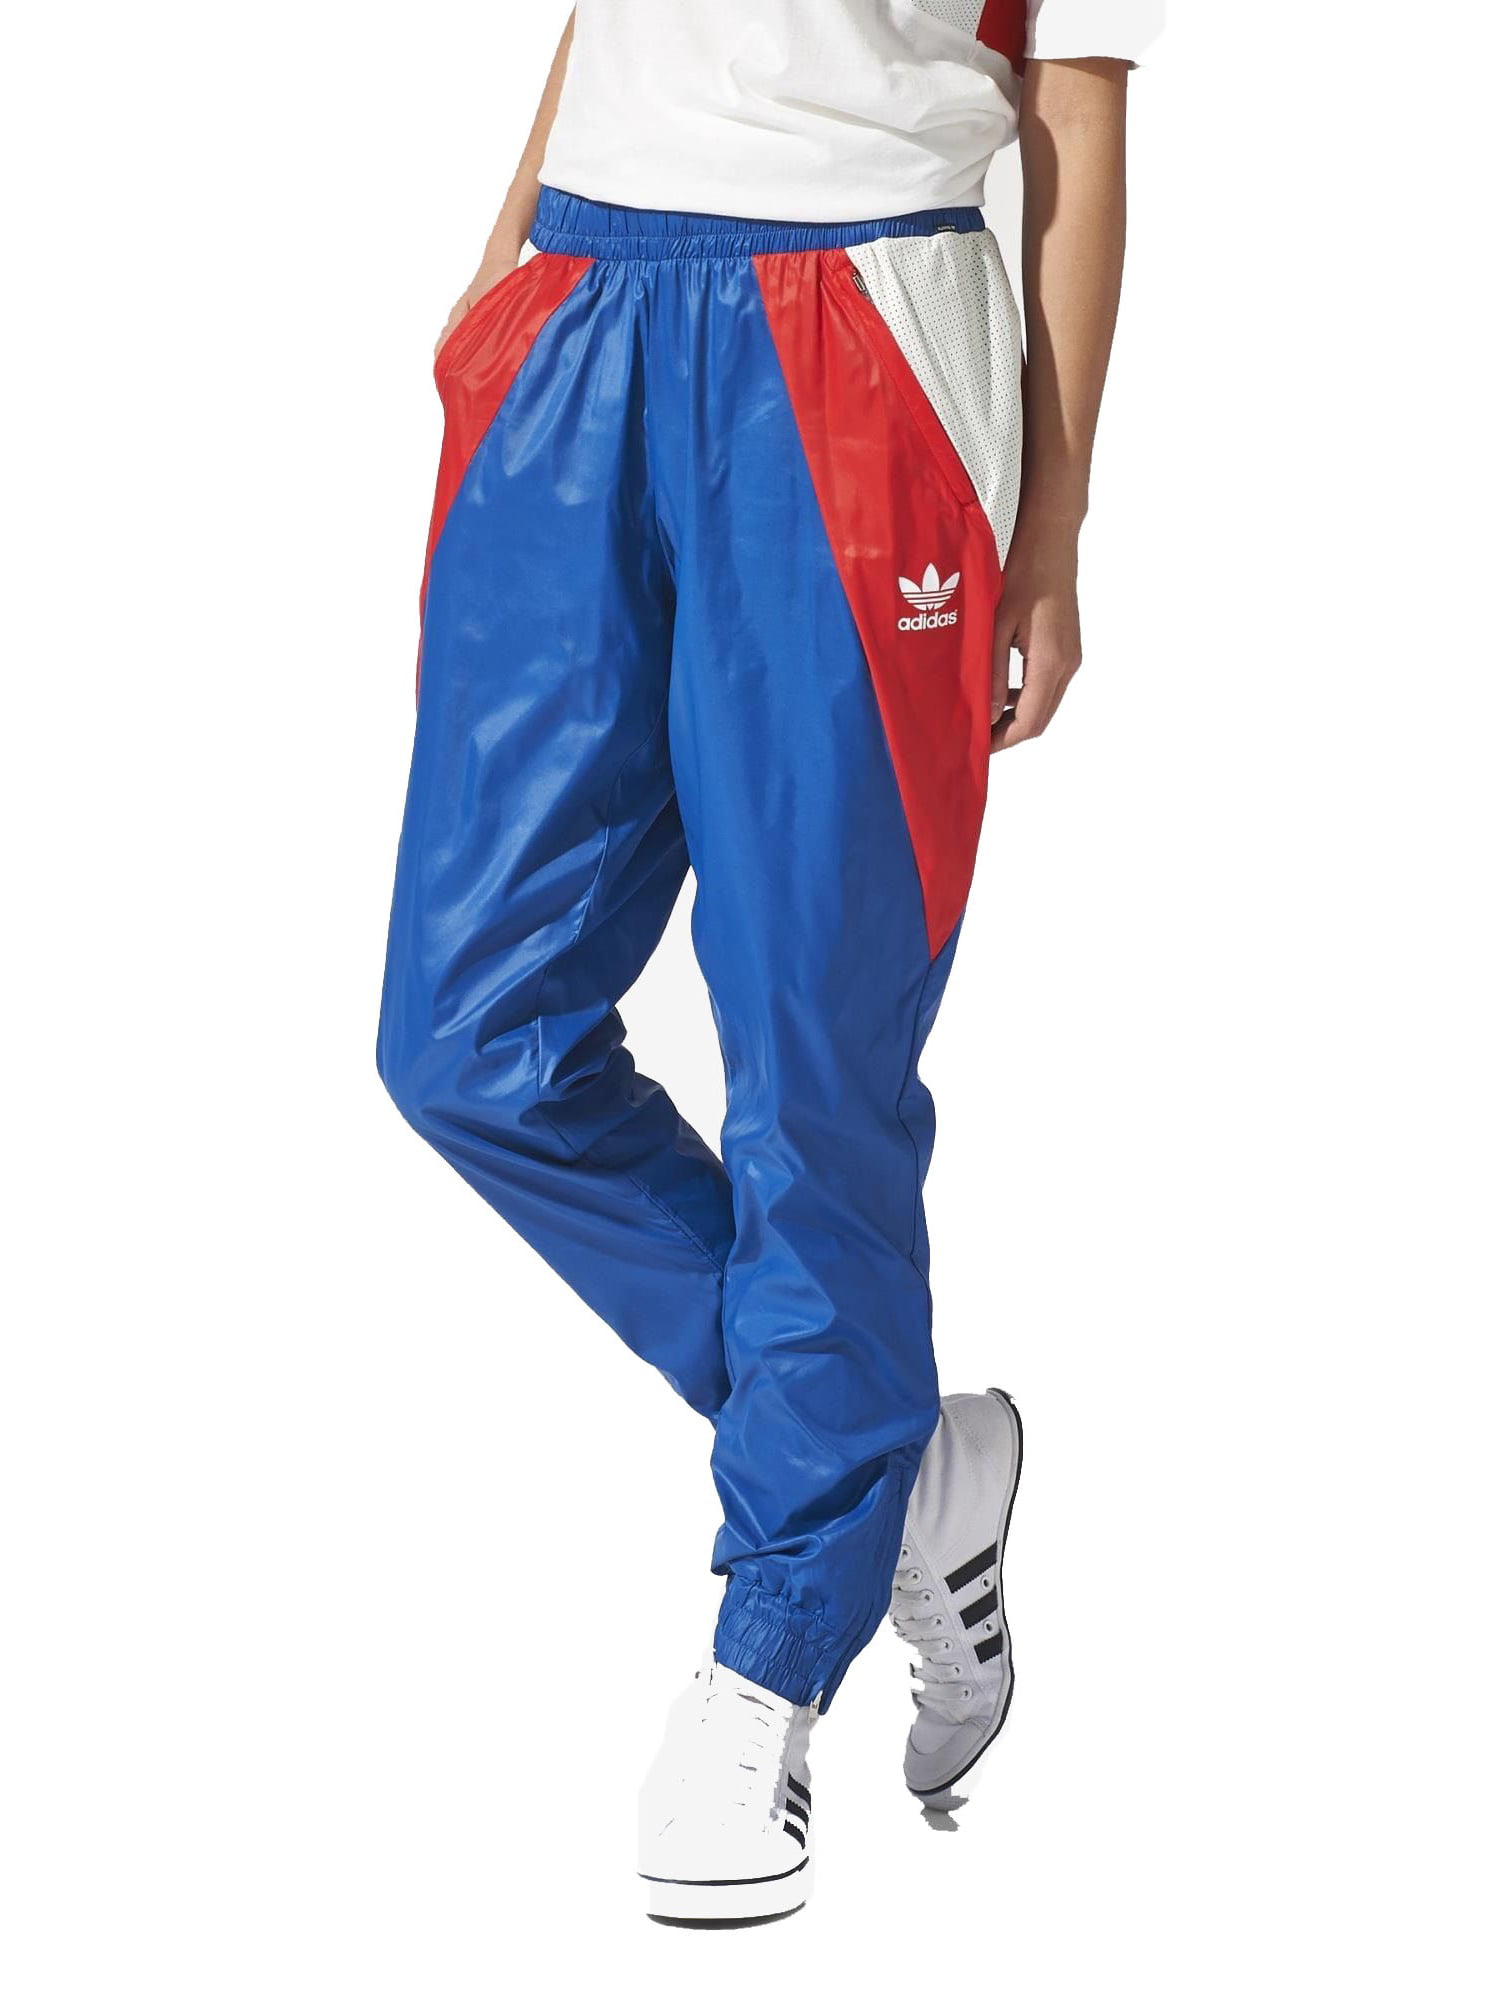 Adidas Originals Women's Archive Series Running Track Pants-Blue/Red 